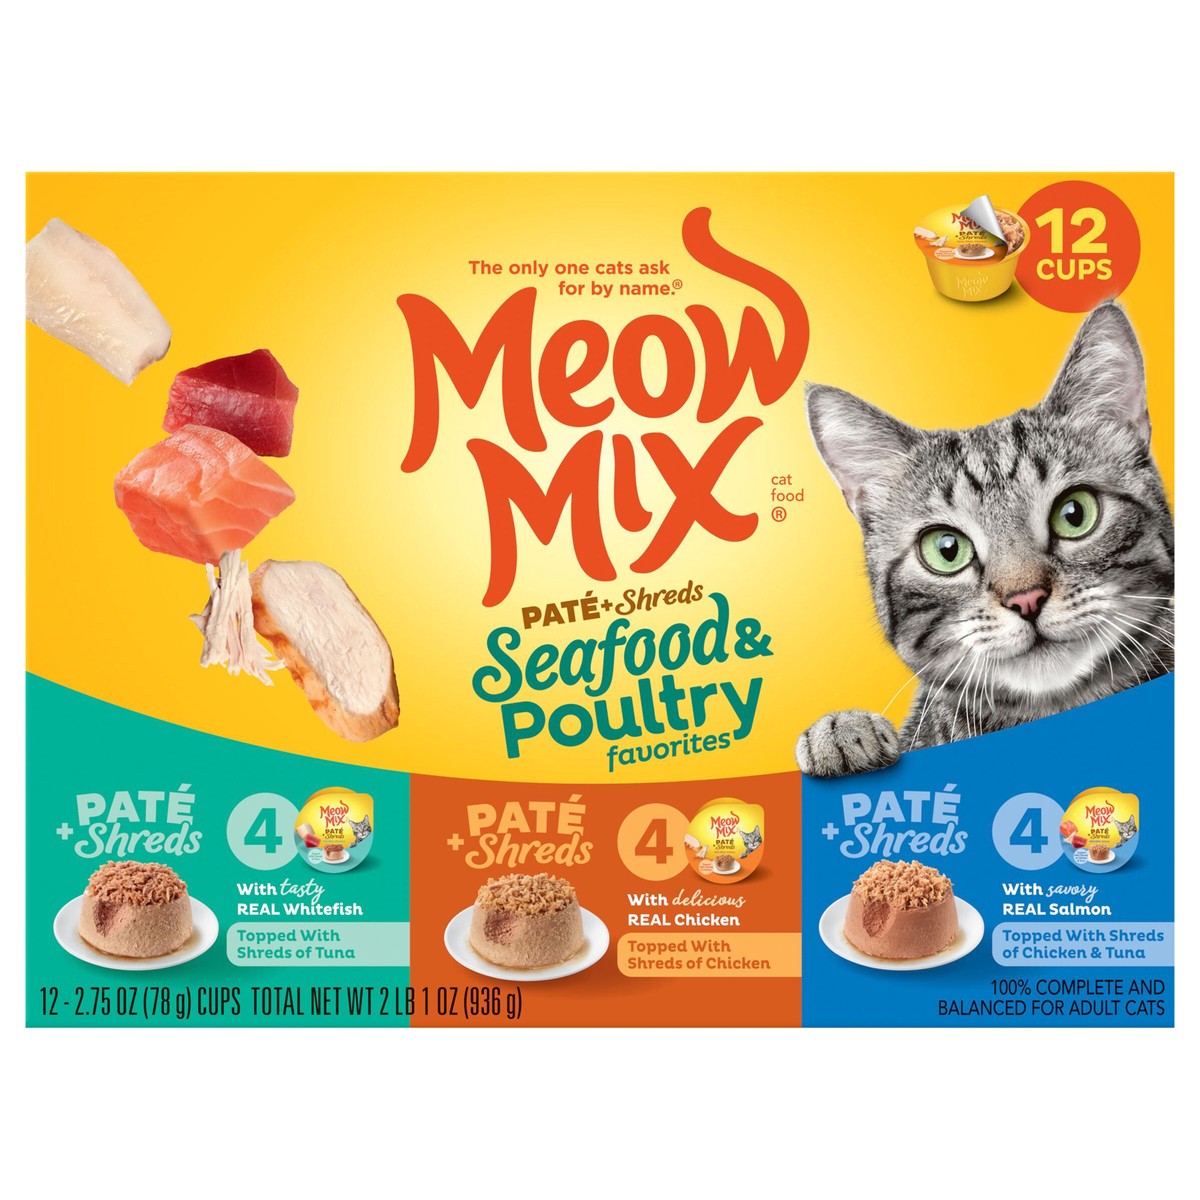 slide 1 of 1, Meow Mix Paté & Shreds Wet Cat Food Variety Pack, Seafood & Poultry Favorites, 12 Cups, 2.75 Oz. Each, 12 ct; 2.75 oz